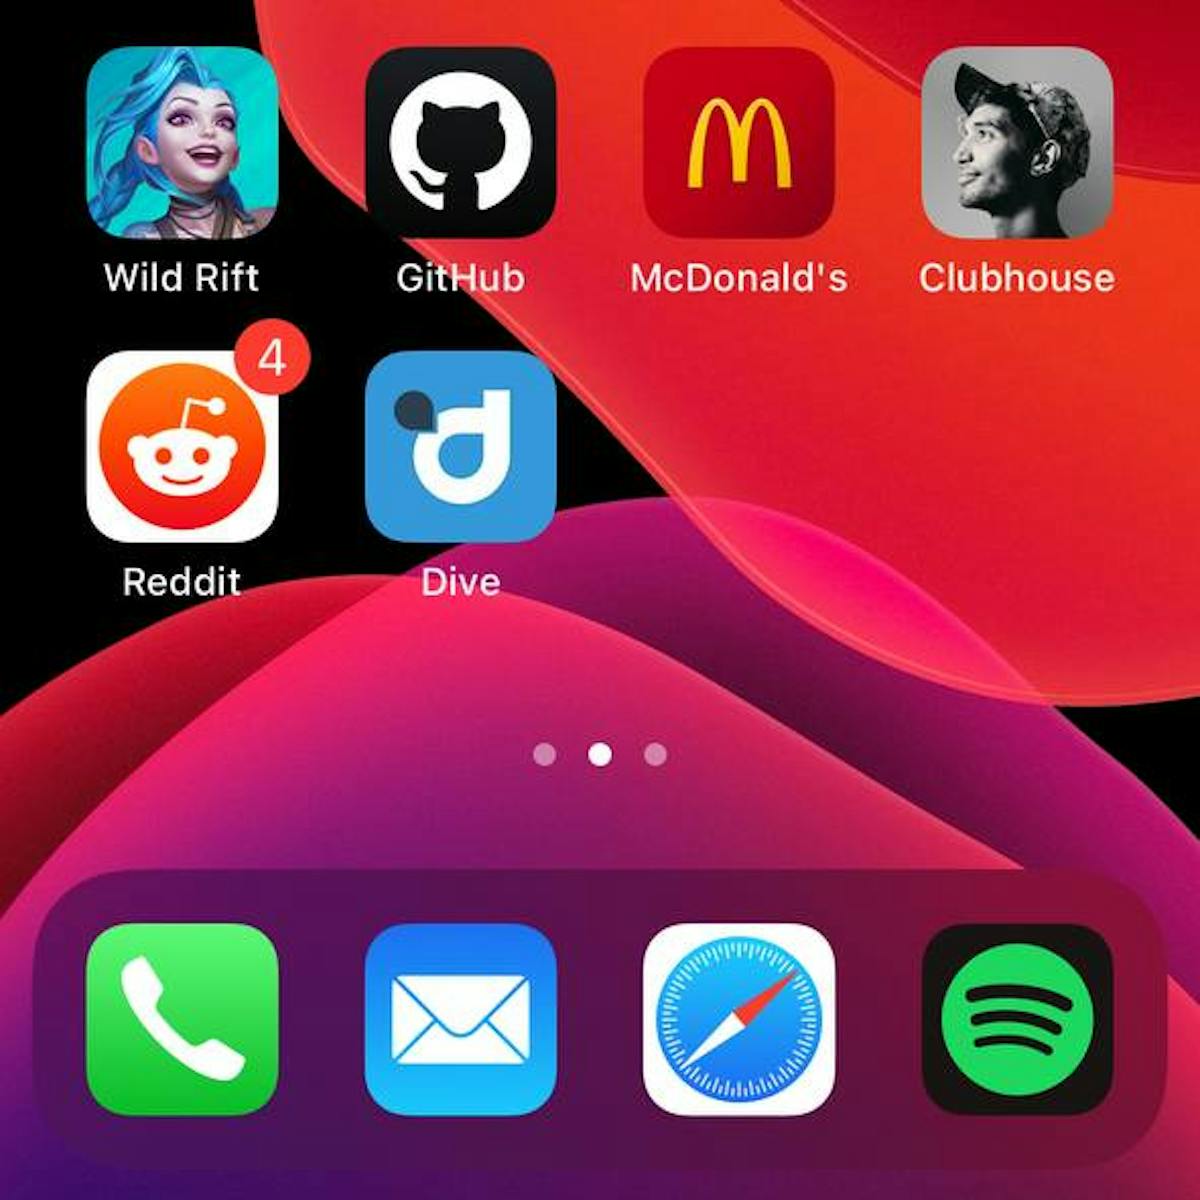 Dive as a progressive web app (app icon, while exists as a website)